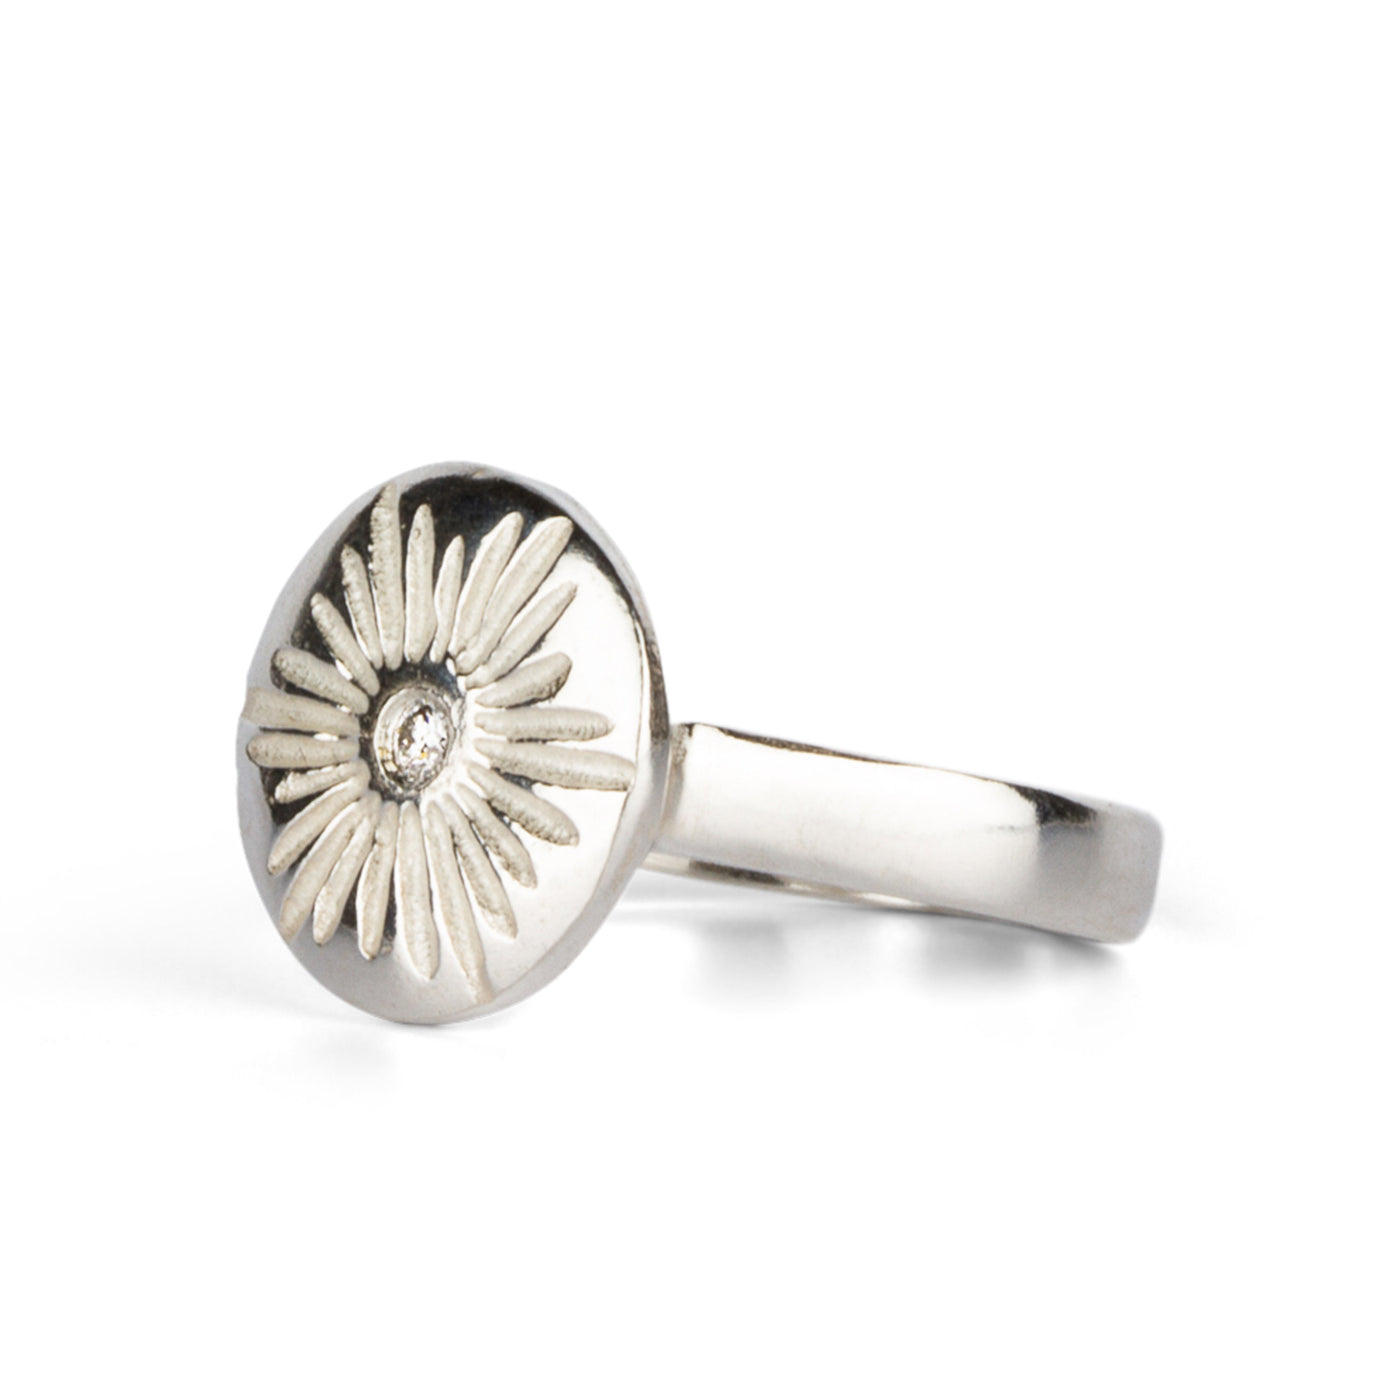 Large carved sunburst ring with a diamond center in sterling silver side view on a white background by Corey Egan